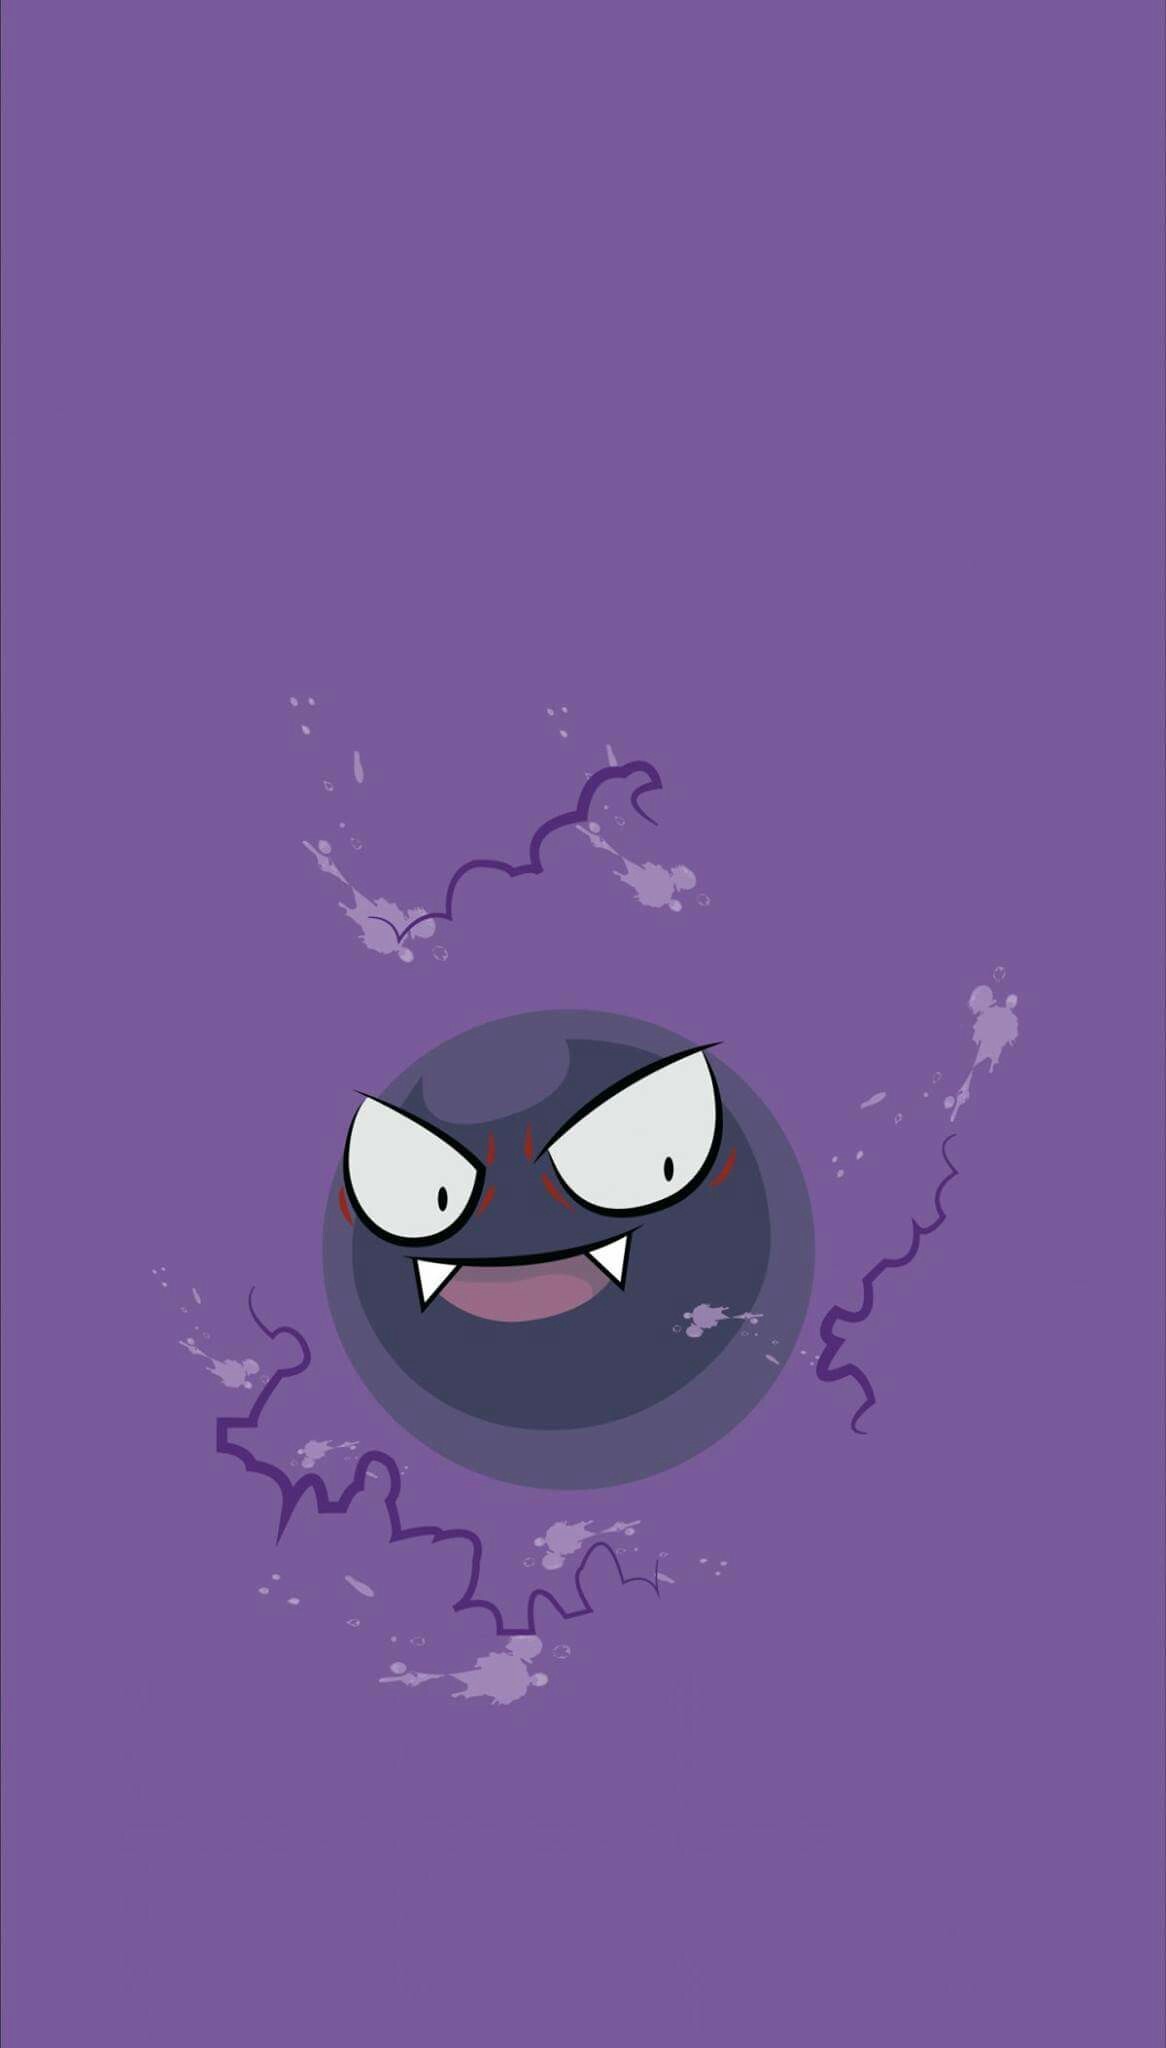 Gastly – Tap to see more Pokemon Go iPhone wallpaper!